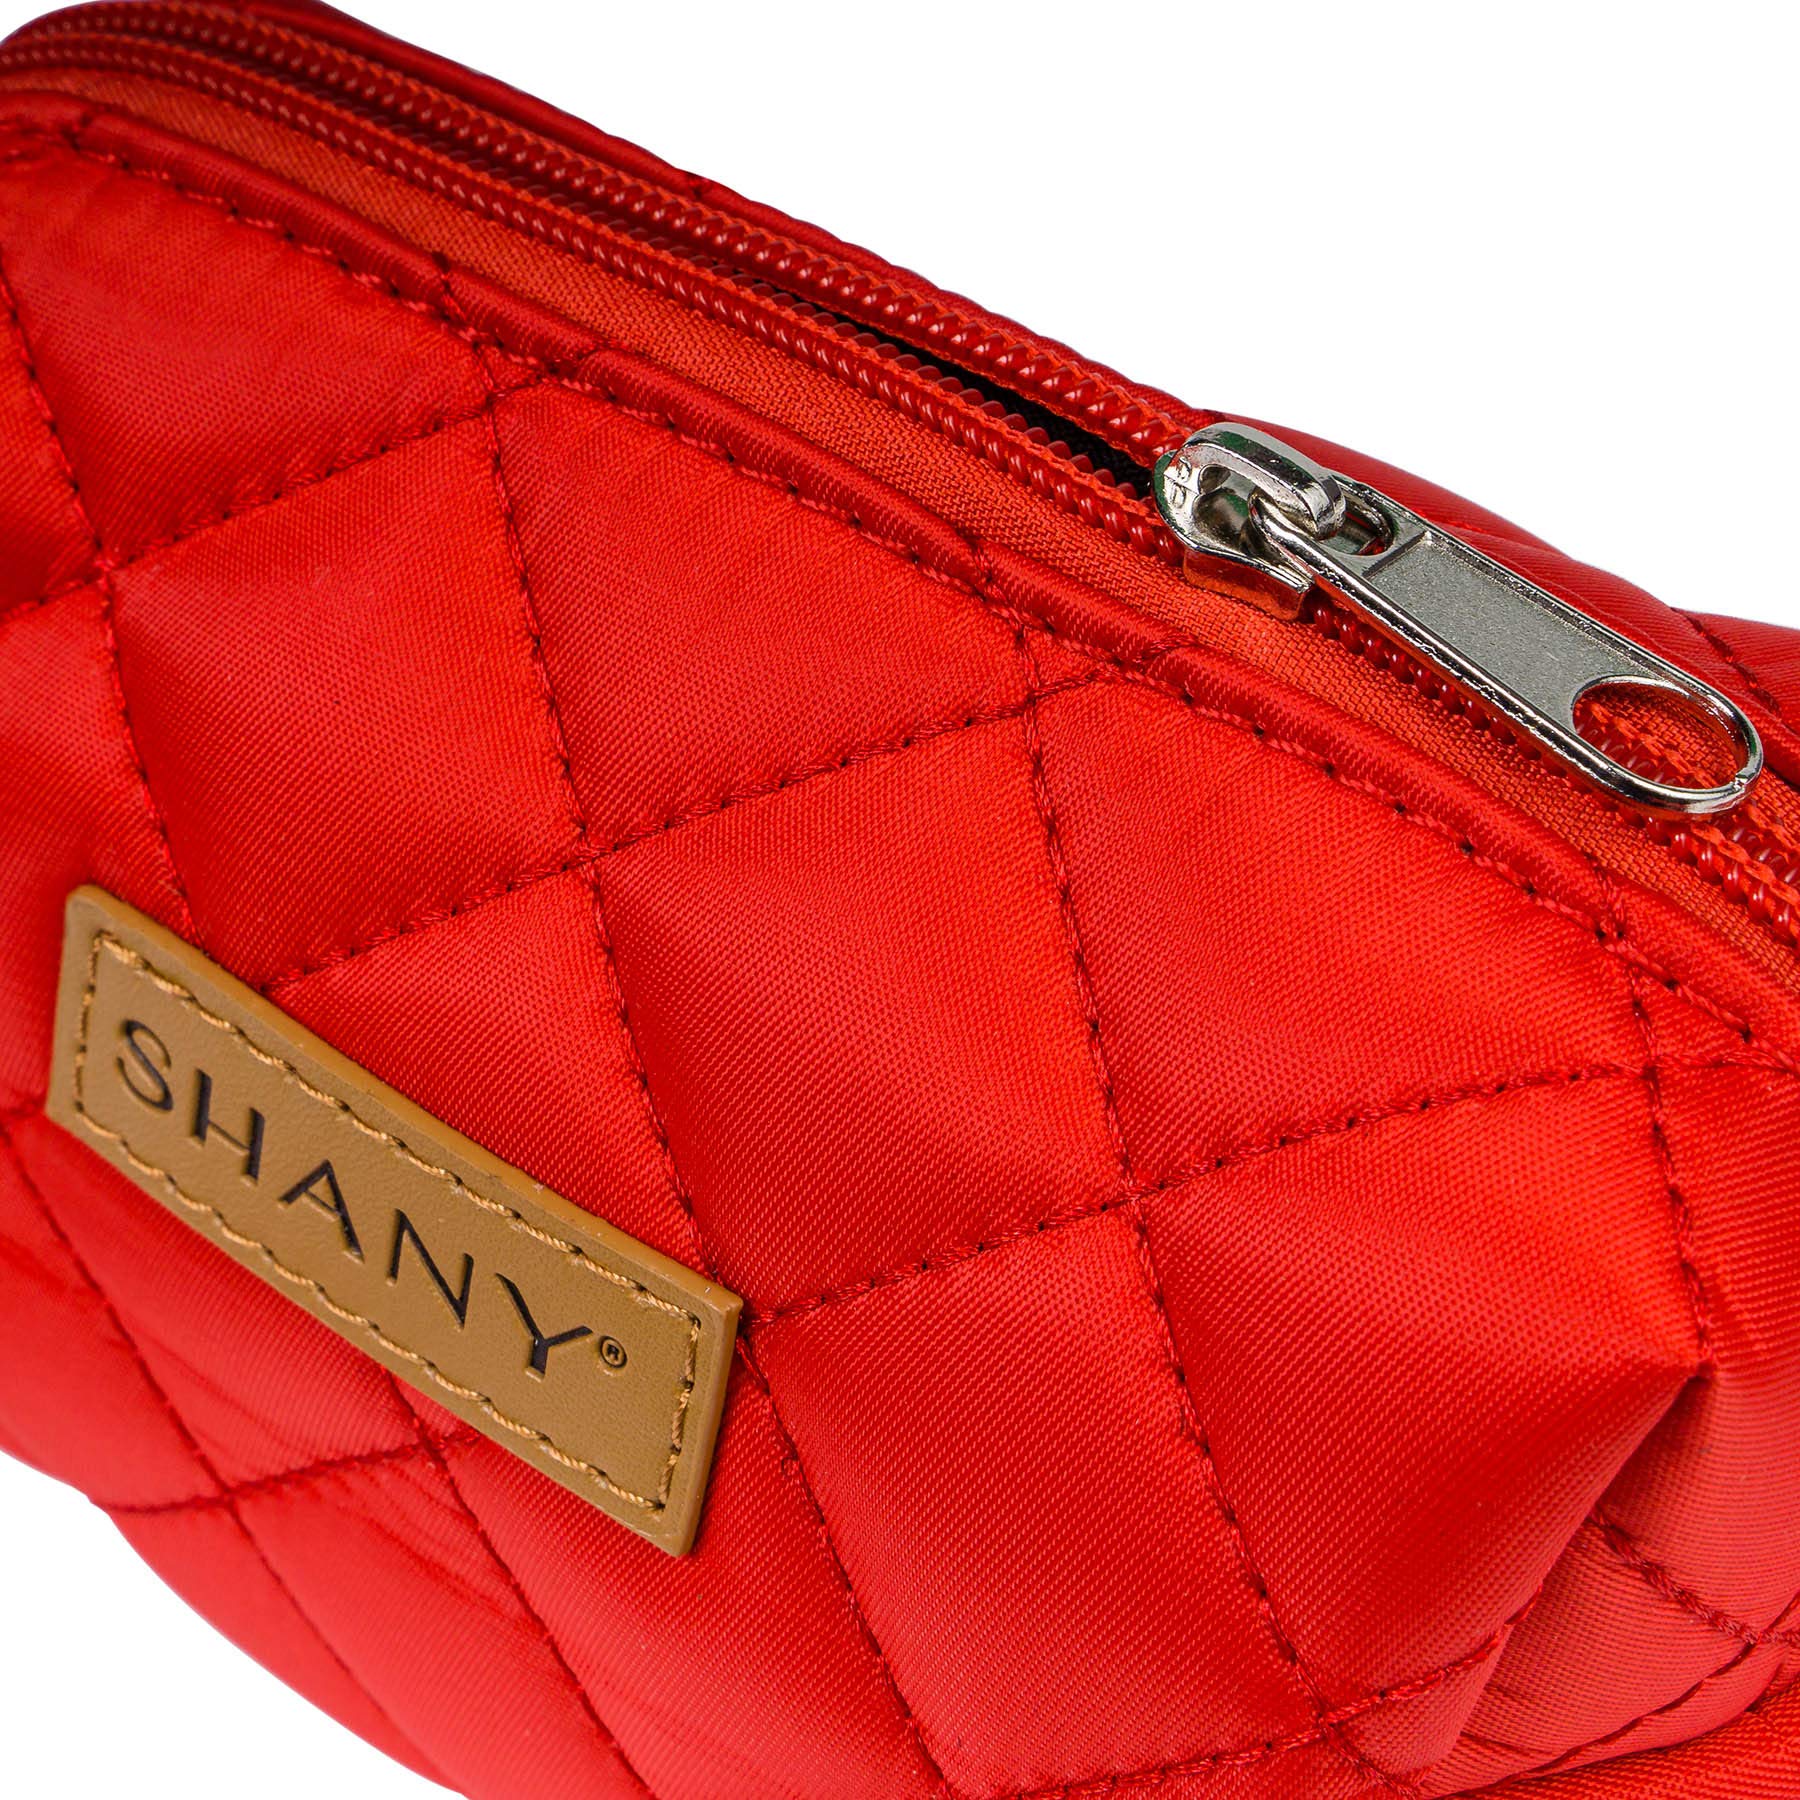 SHANY Limited Edition Mini Tote Bag and Travel Makeup Bag, Cherry Red